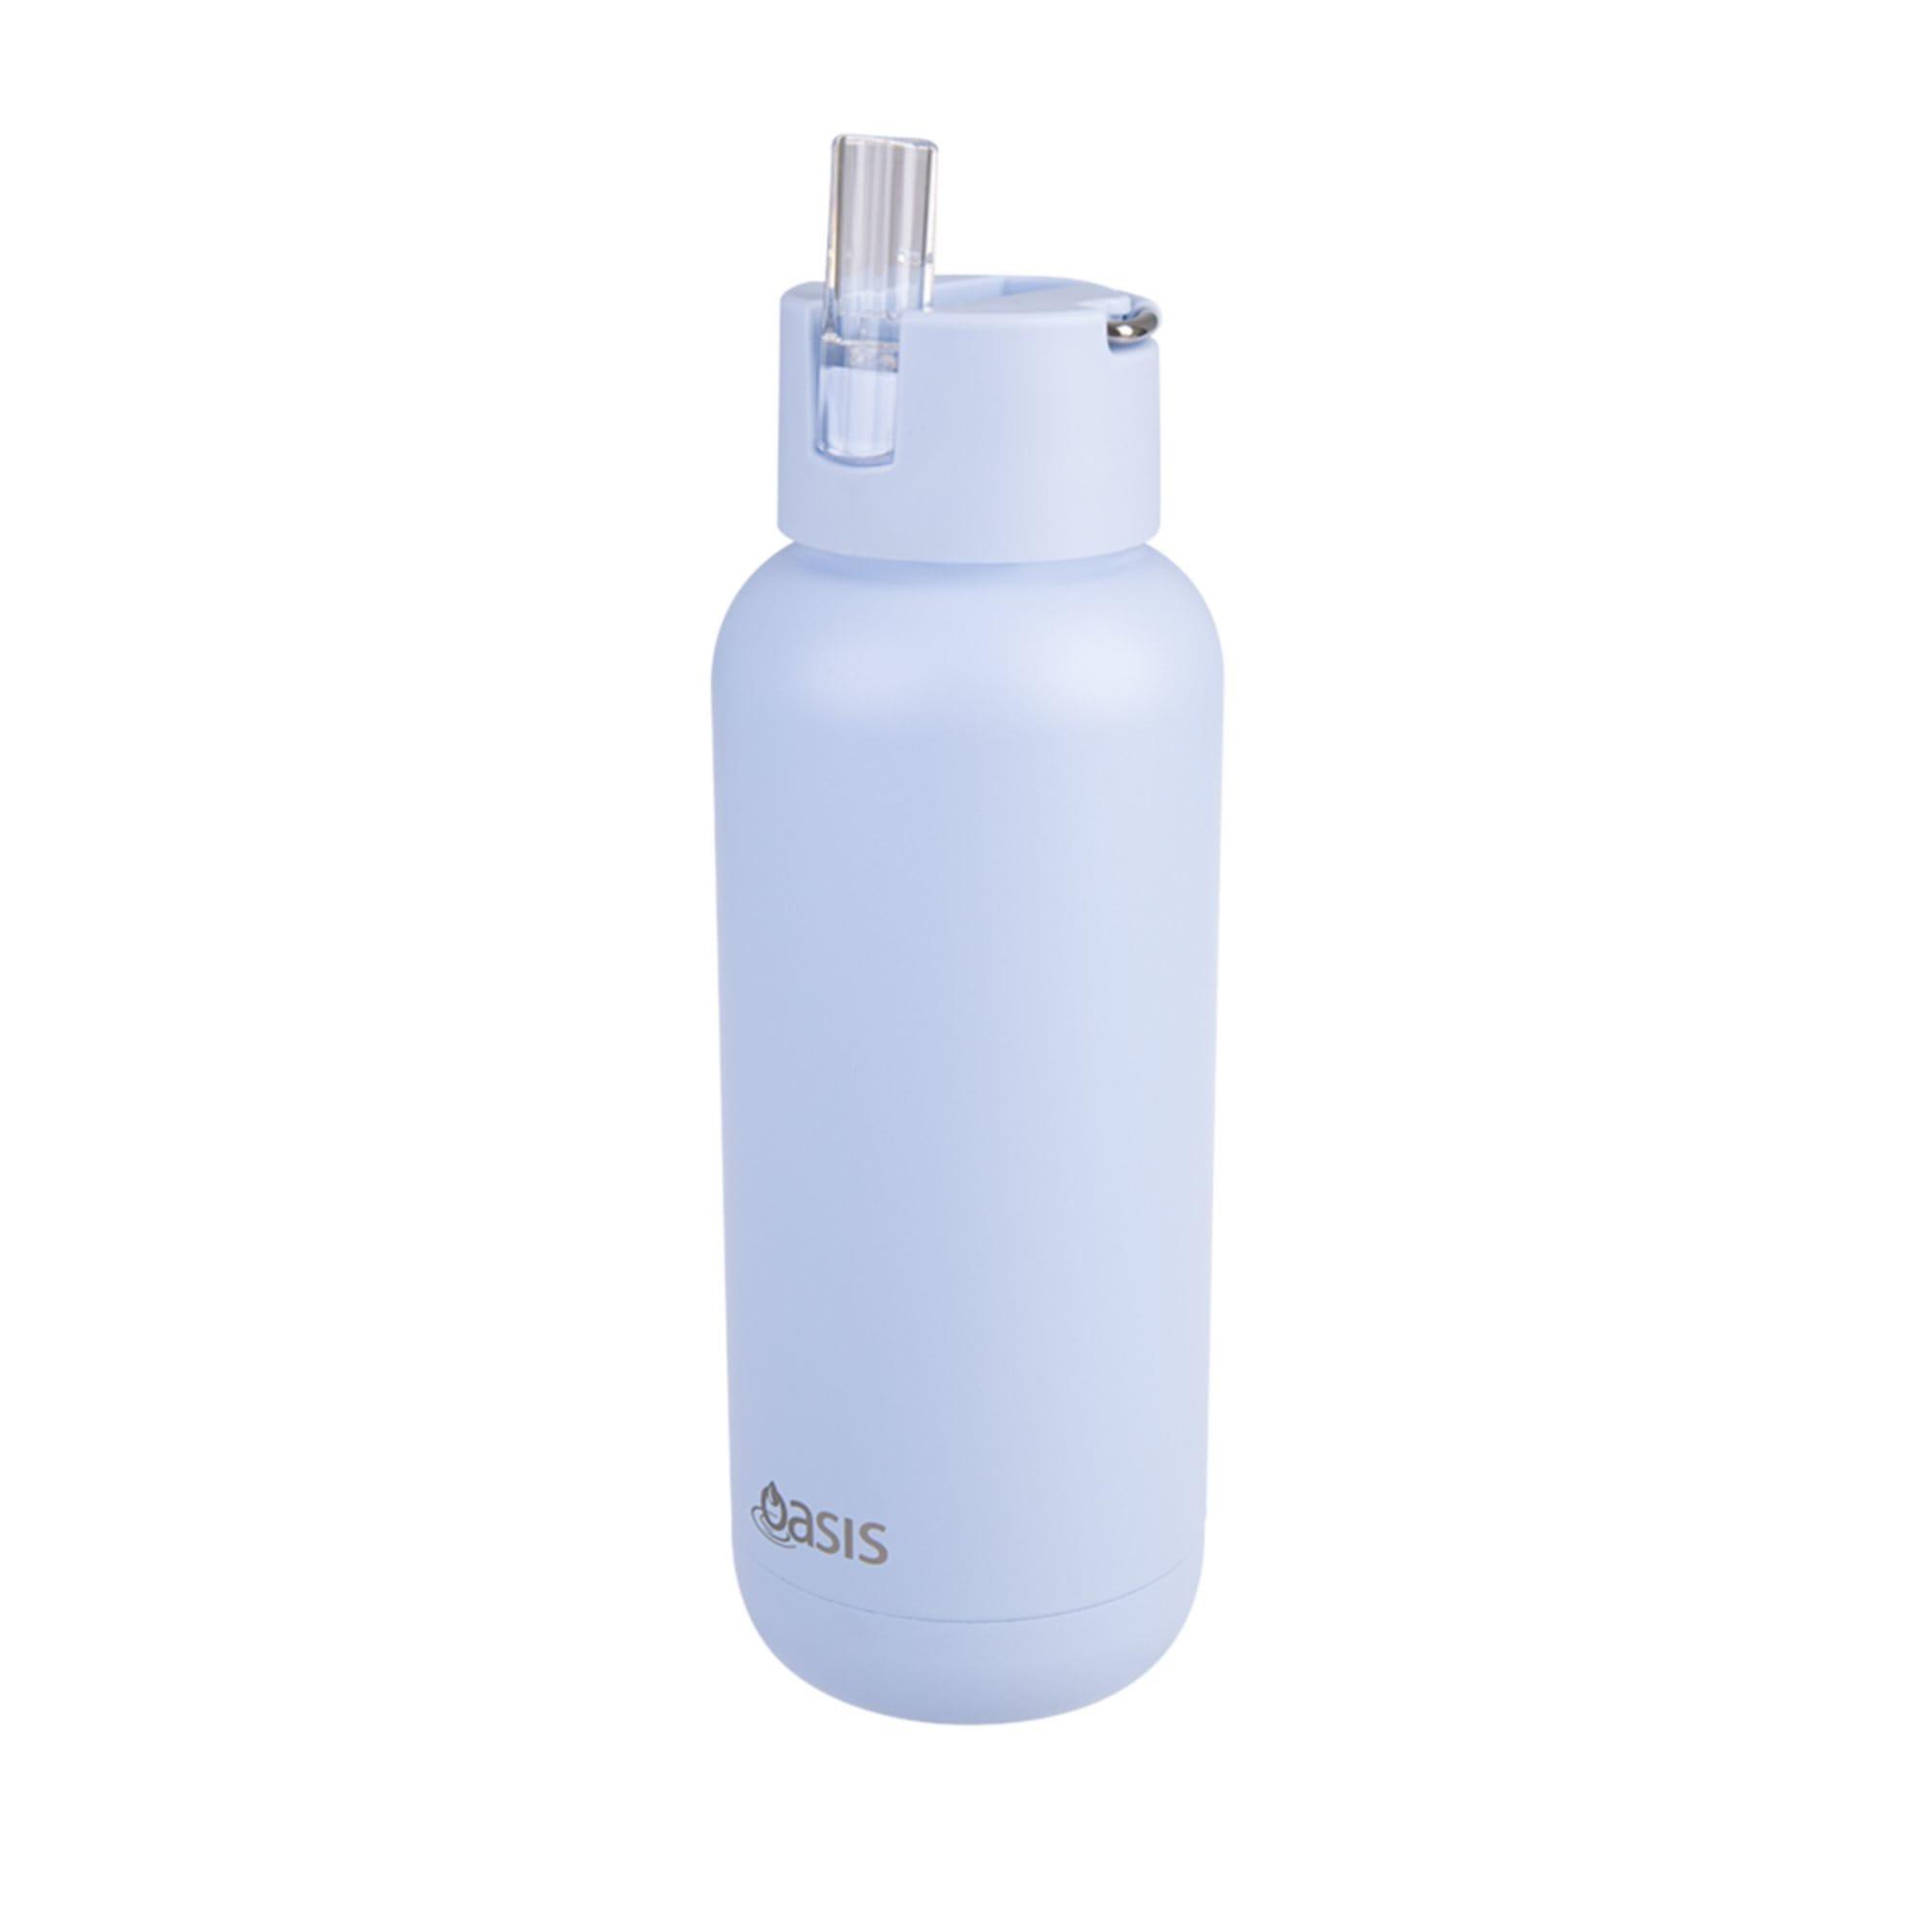 Oasis Moda Triple Wall Insulated Drink Bottle 1L Periwinkle Image 4